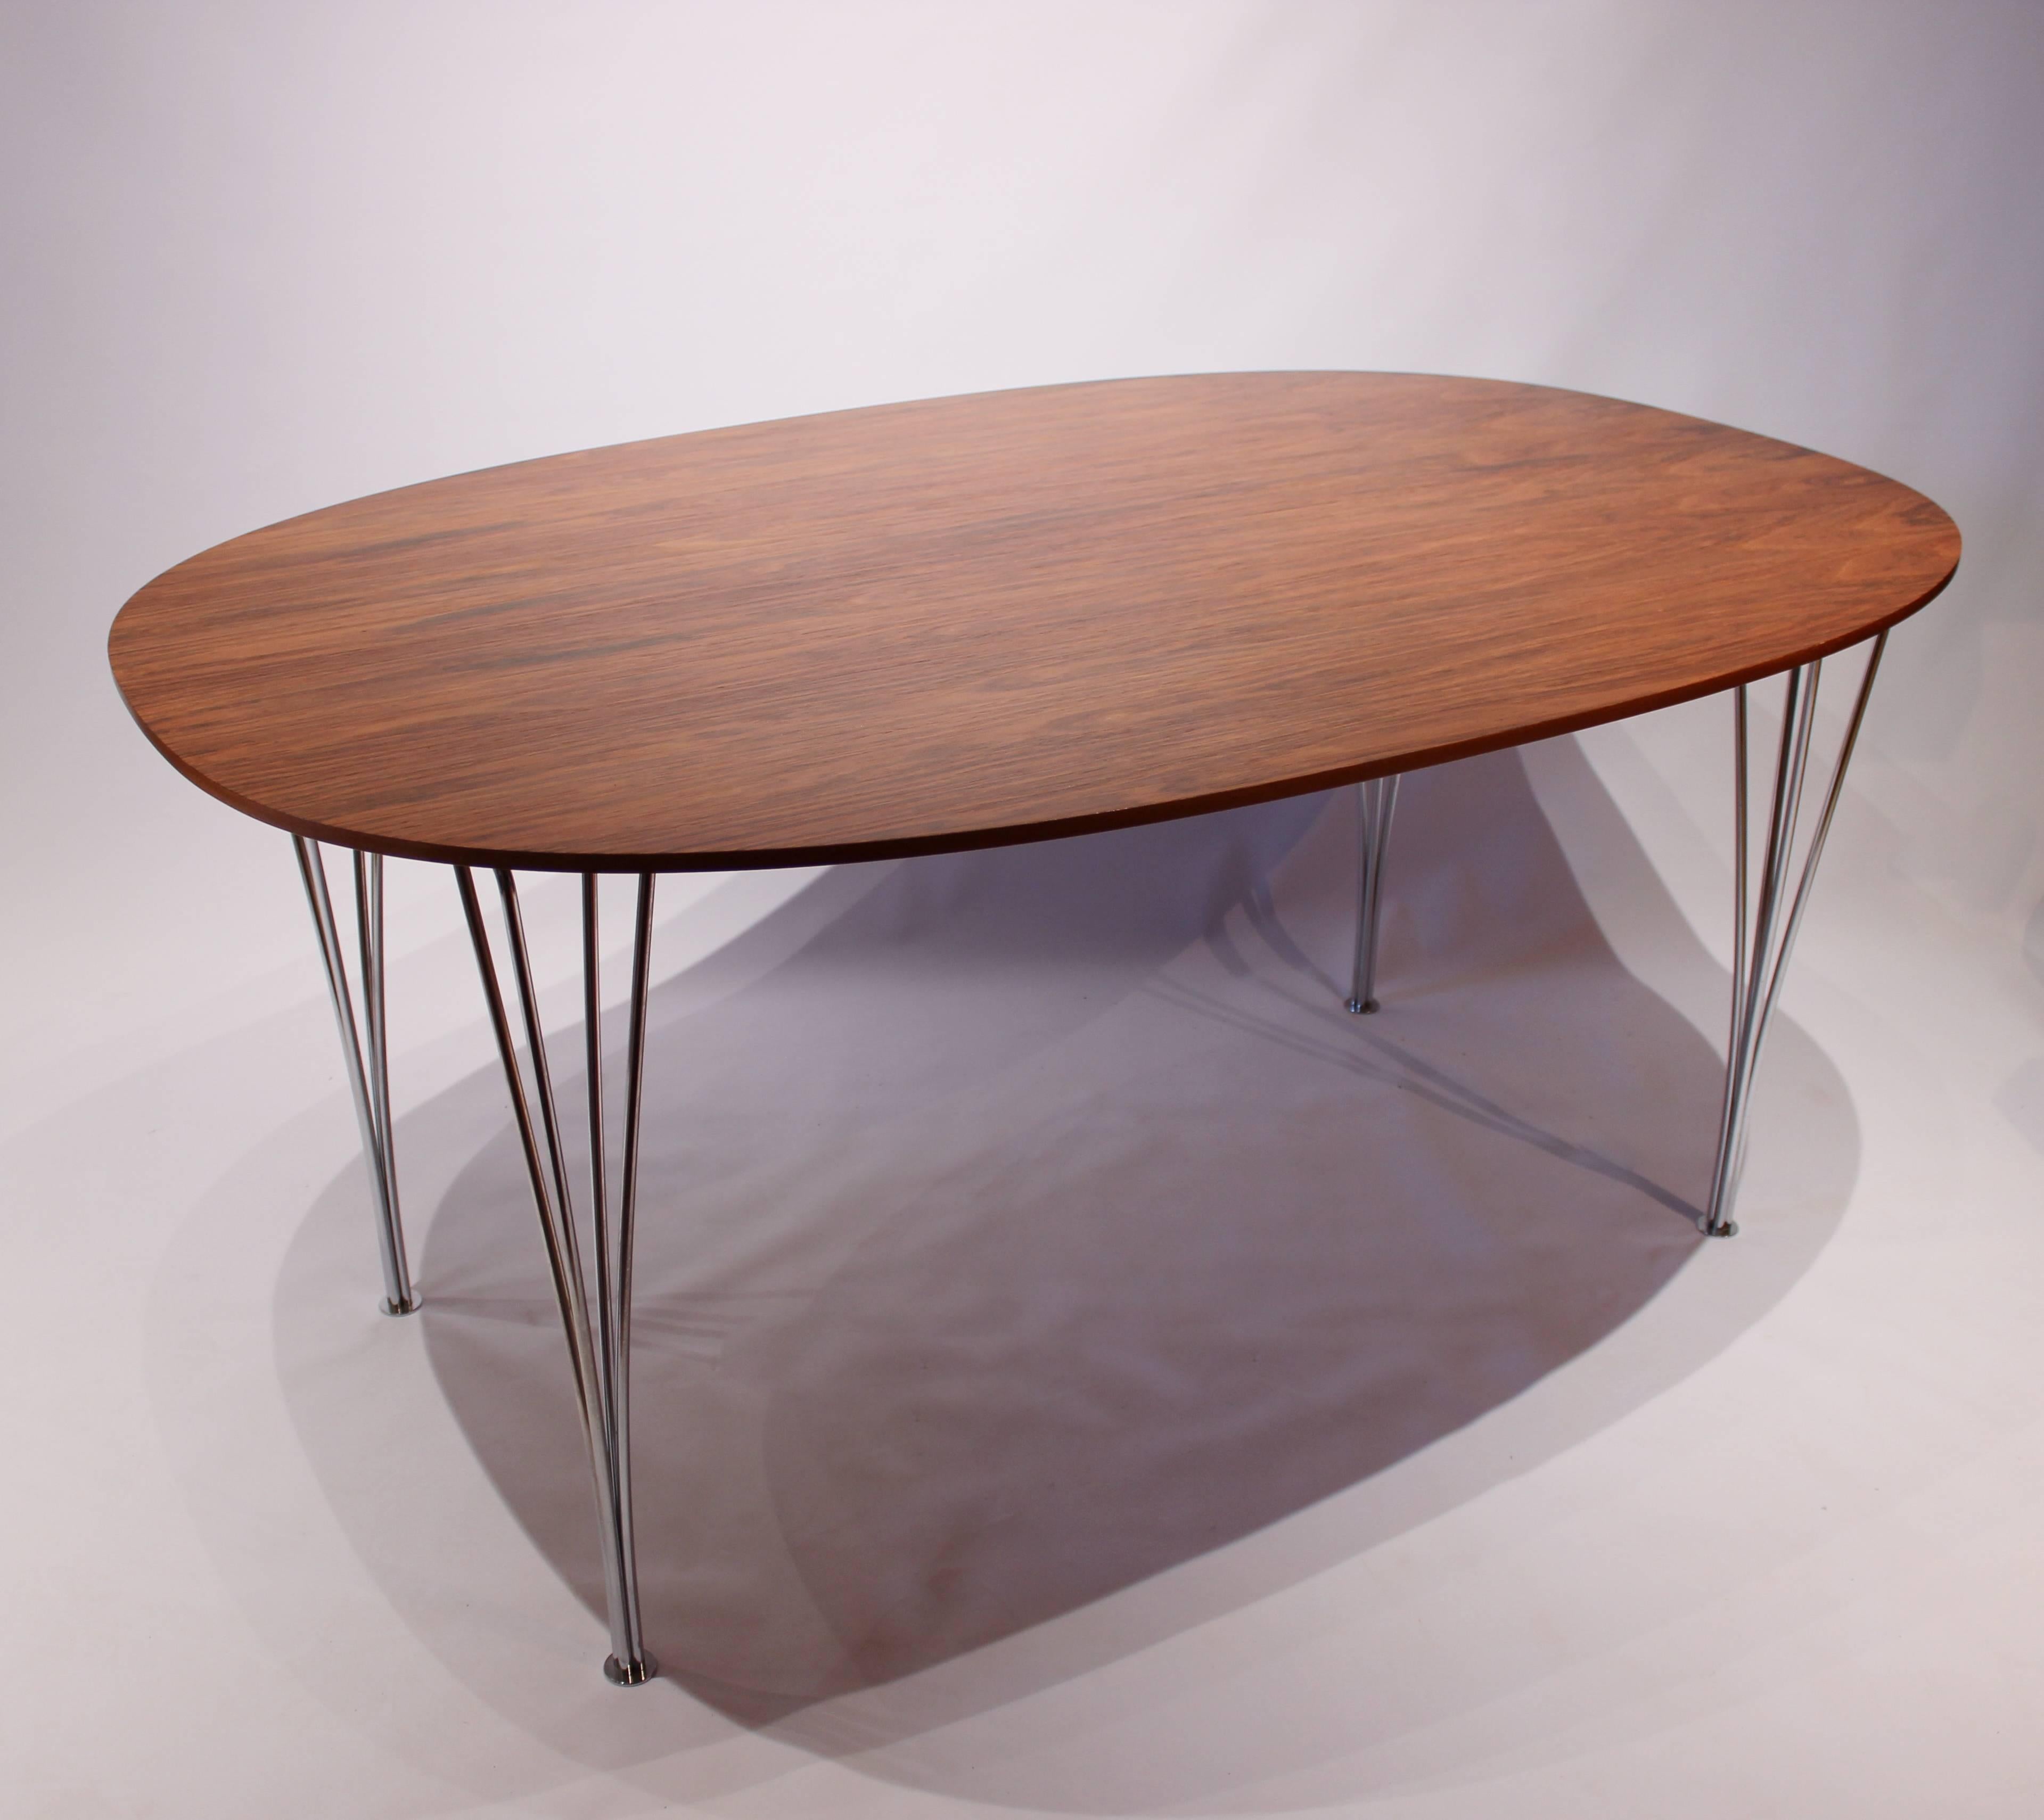 Super Ellipse Table in Rosewood by Piet Hein, Arne Jacobsen and Bruno Mathsson 4